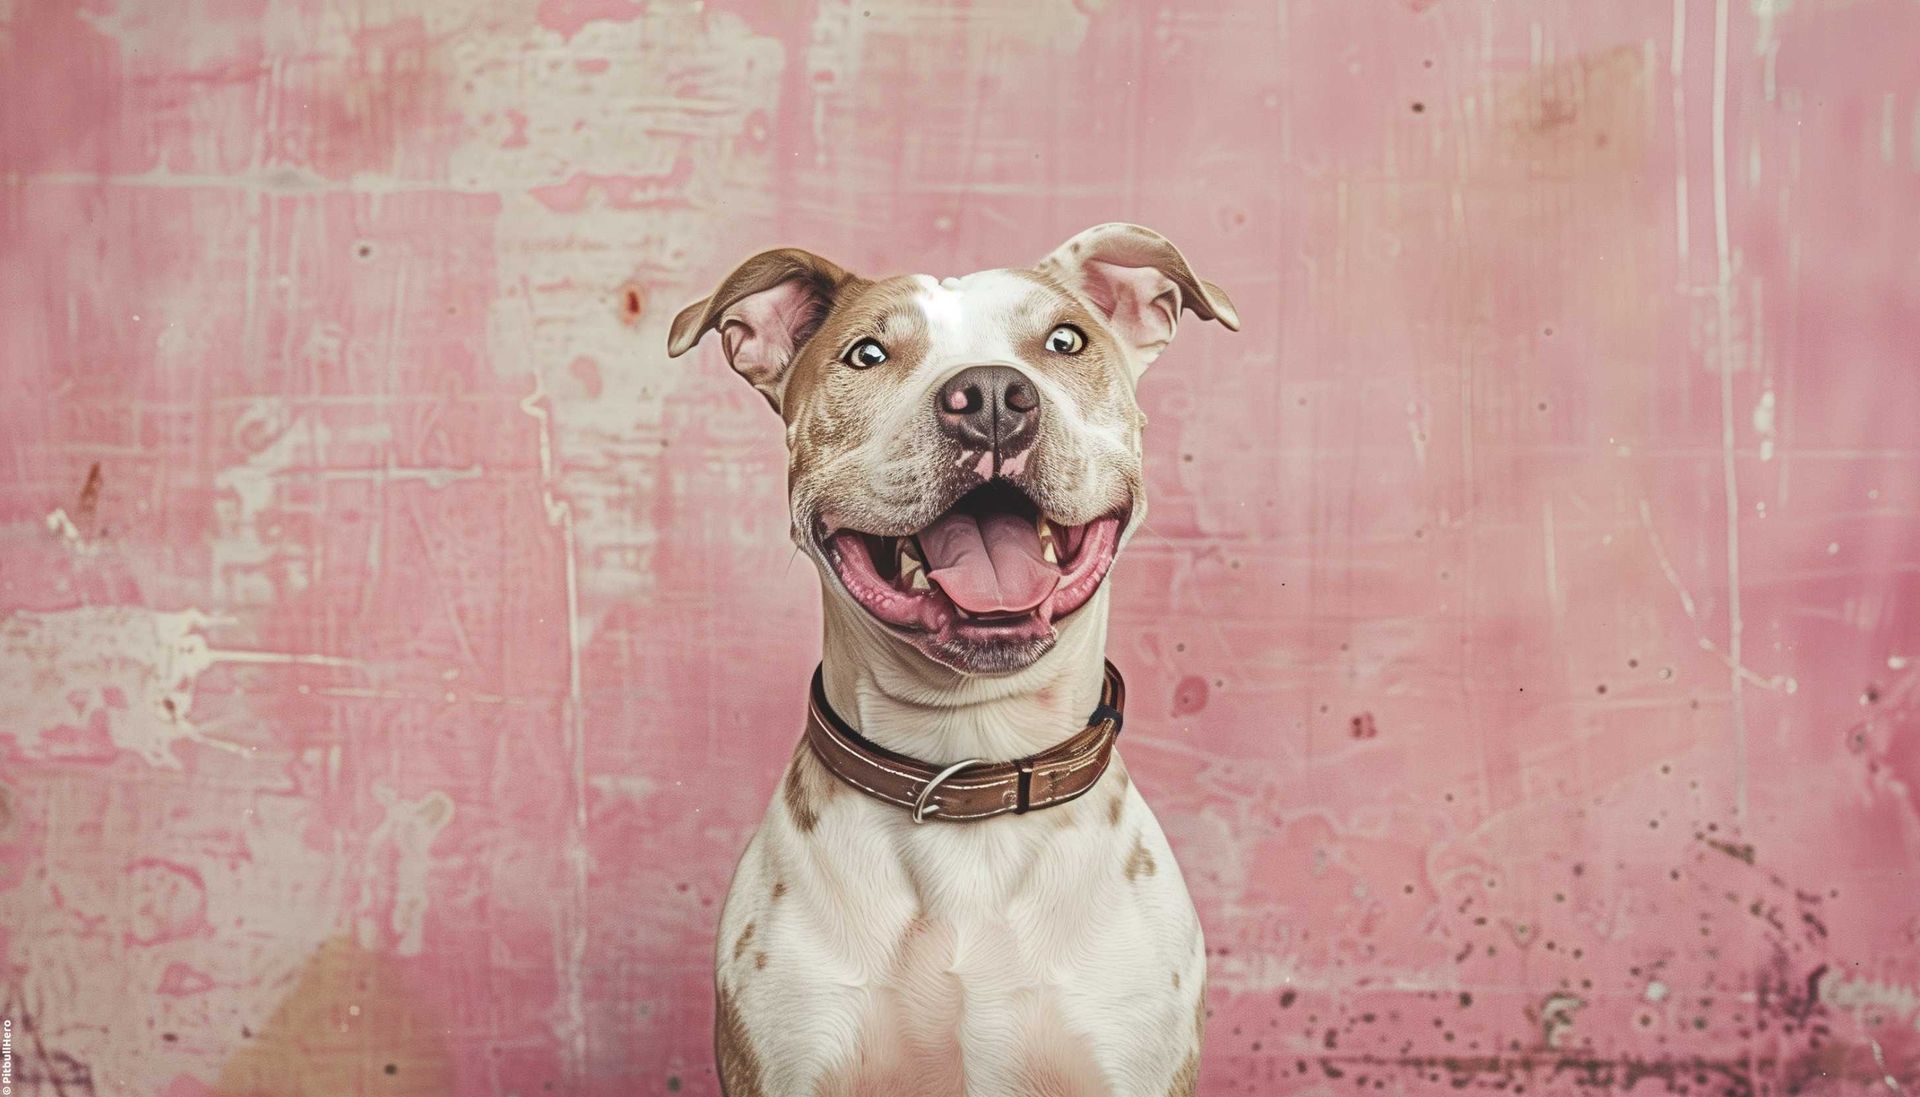 image of a pit bull dog